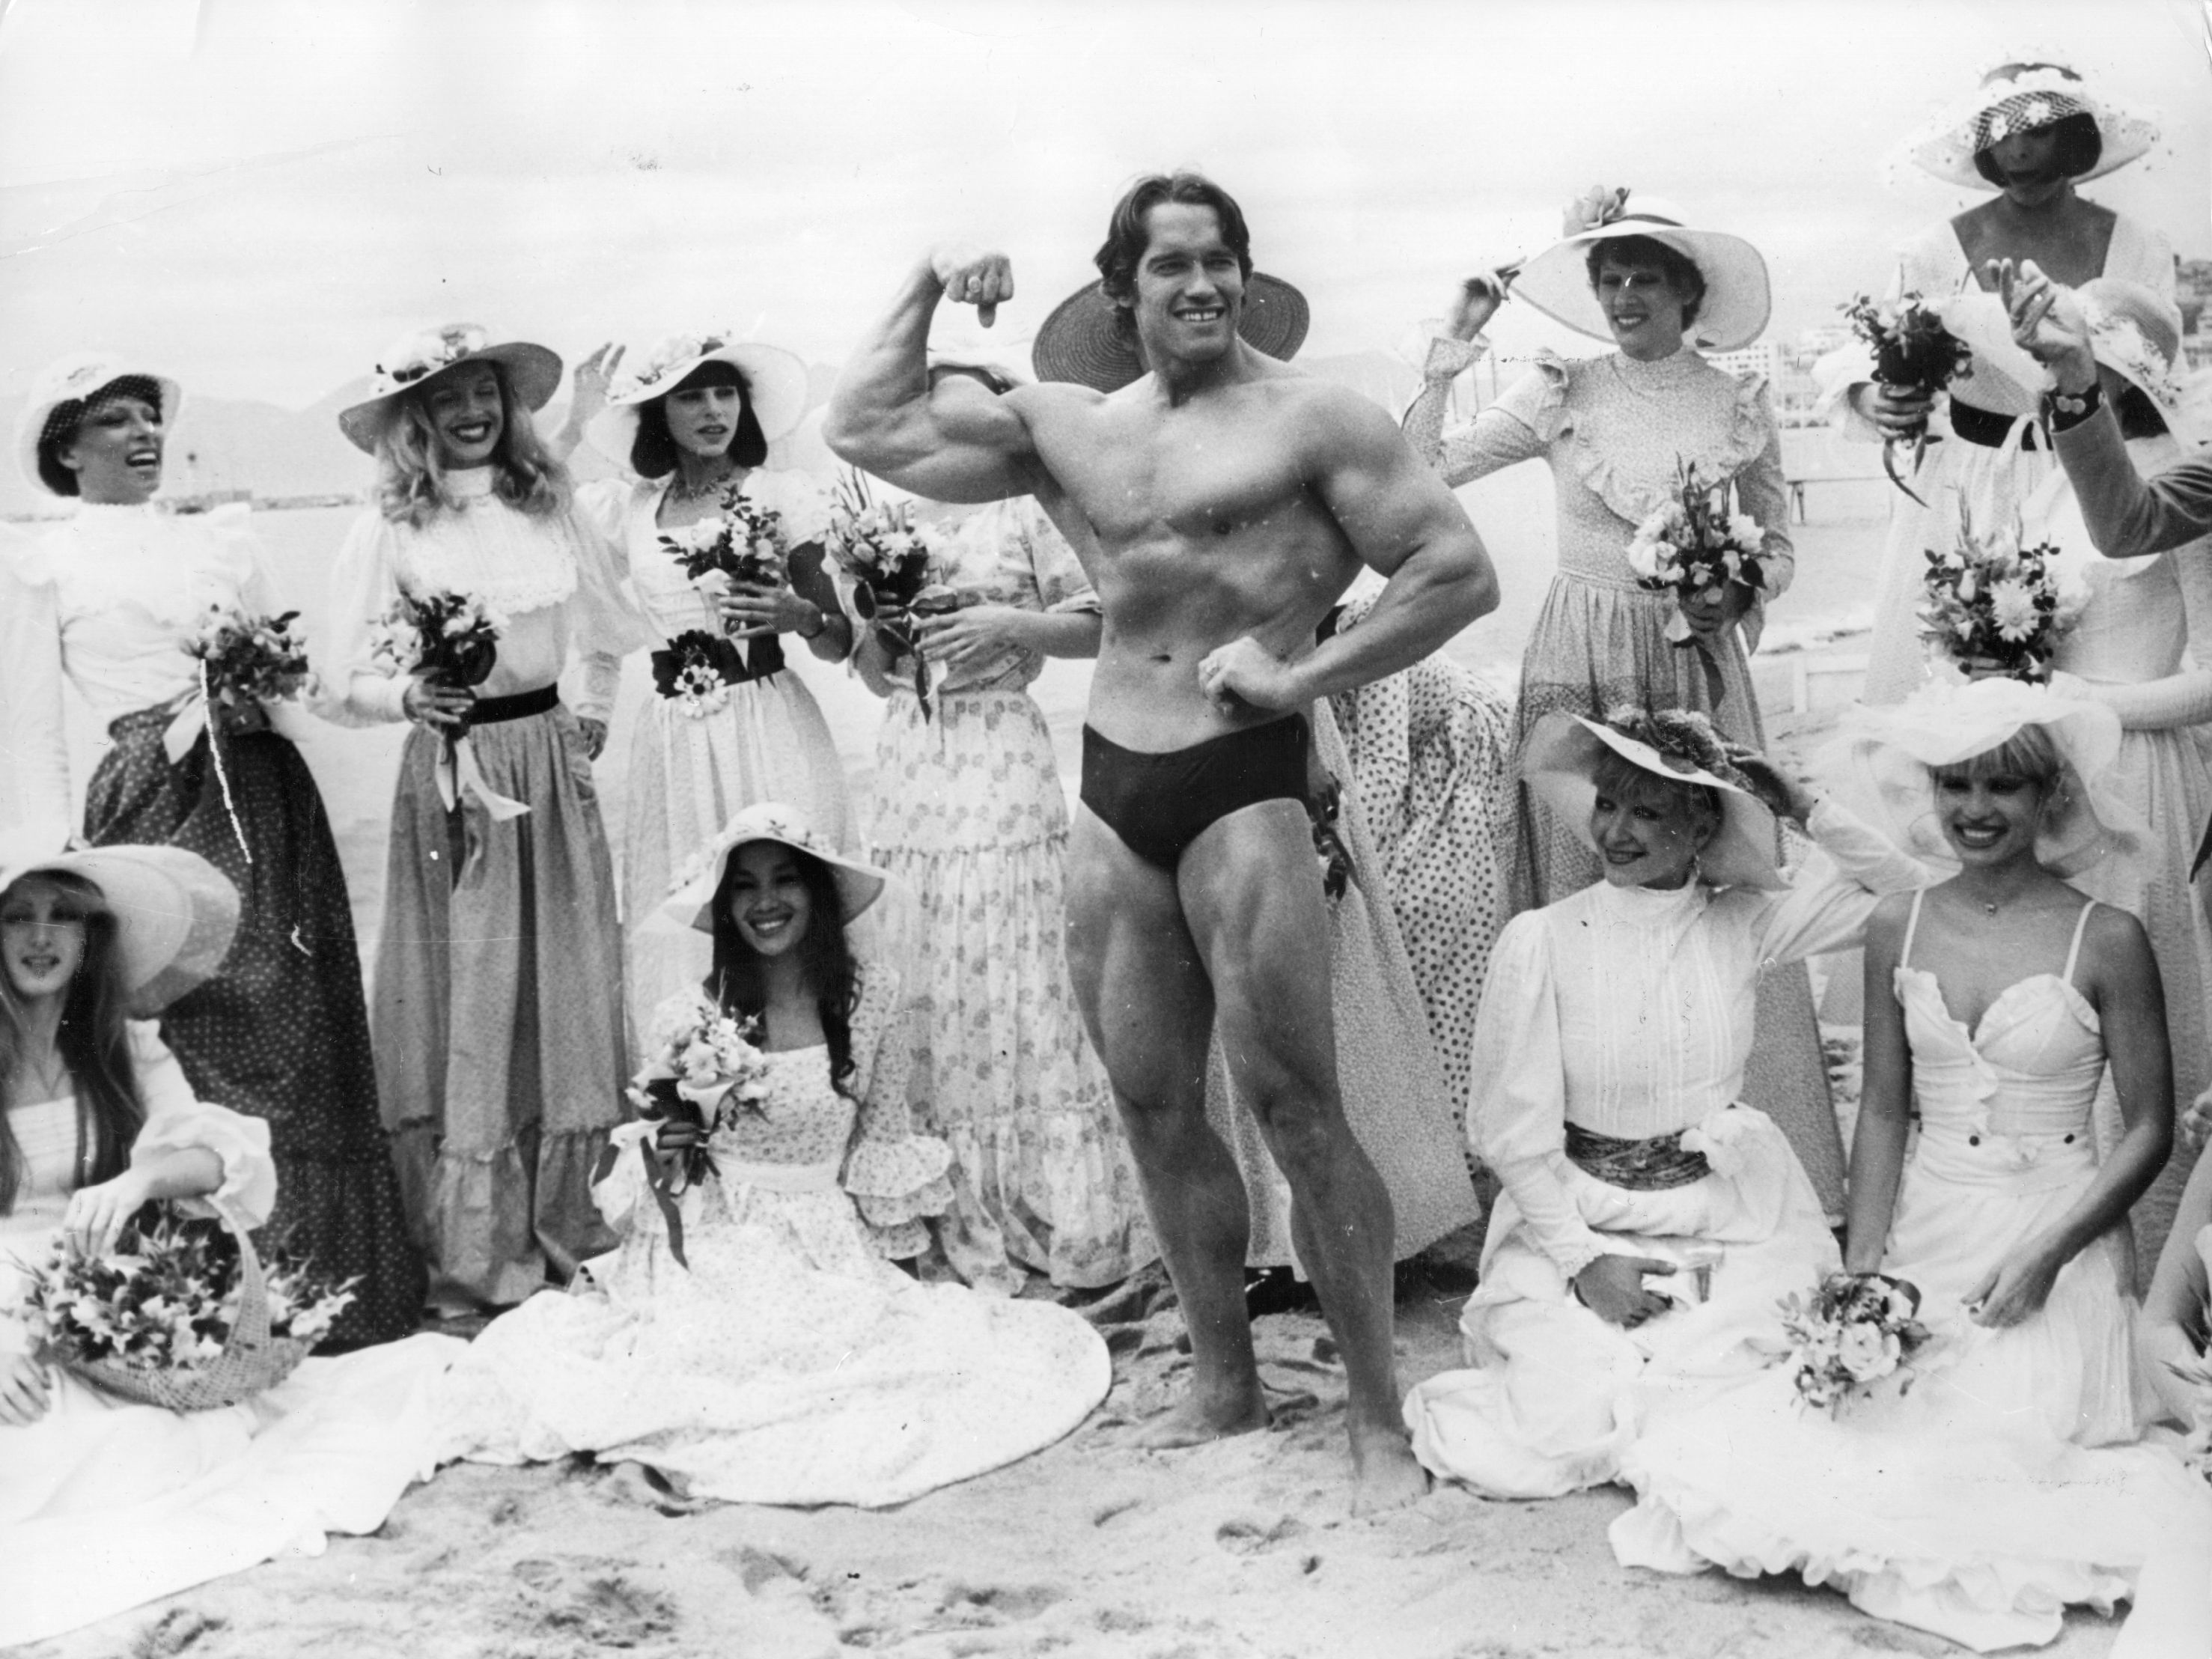 Arnold Schwarzenegger, the film actor who first became famous as Mr Universe for his magnificent physique, on Cannes beach during the Film Festival with the girls from the Folies Bergere.